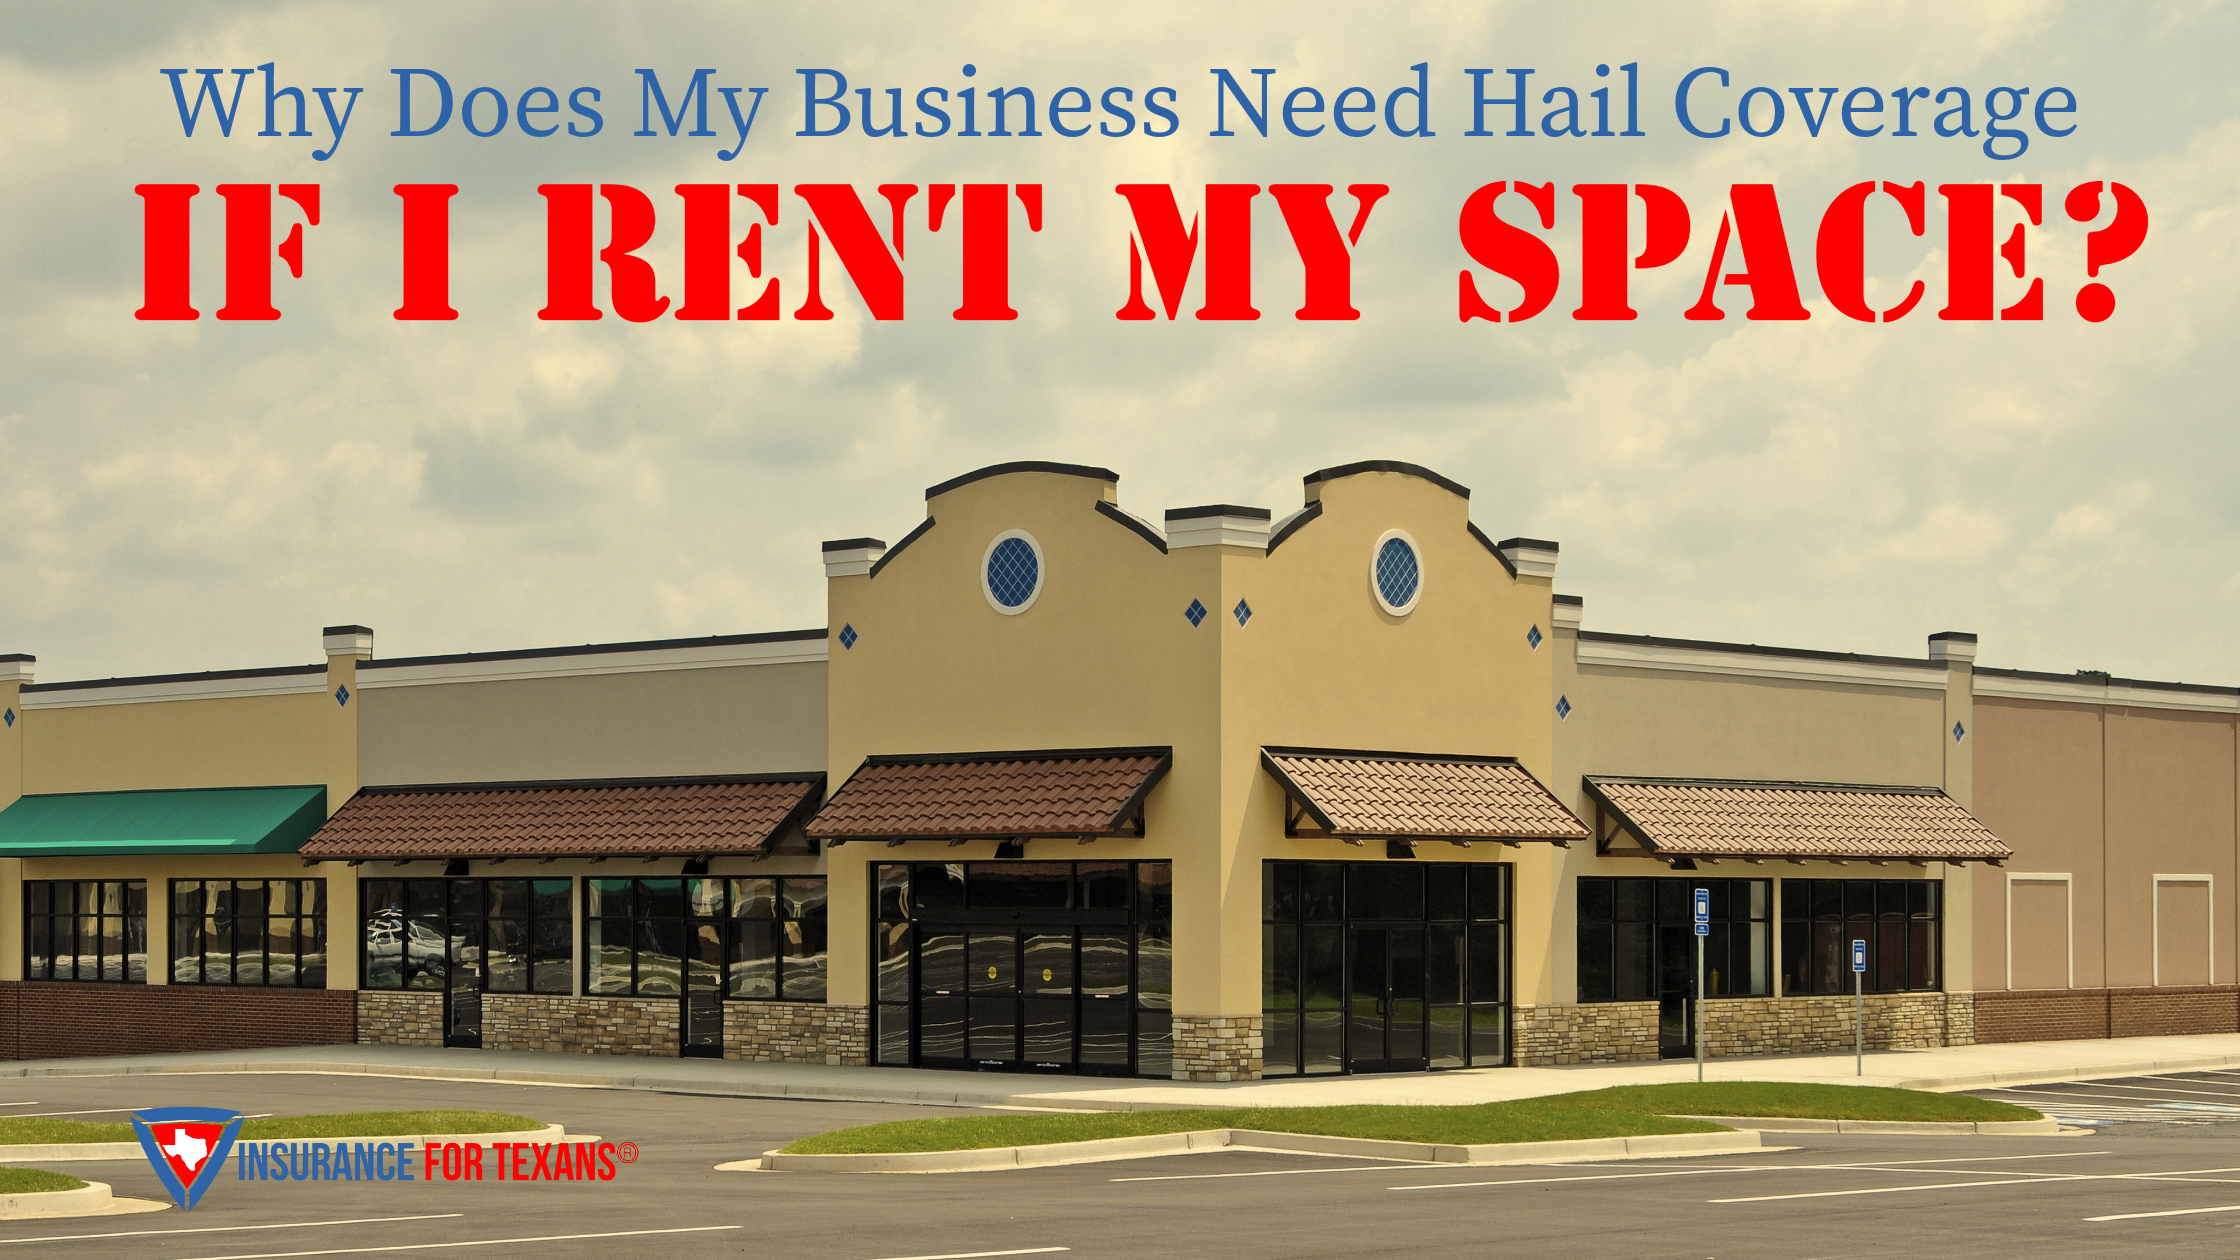 Why Does My Business Need Hail Coverage If I Rent My Space?